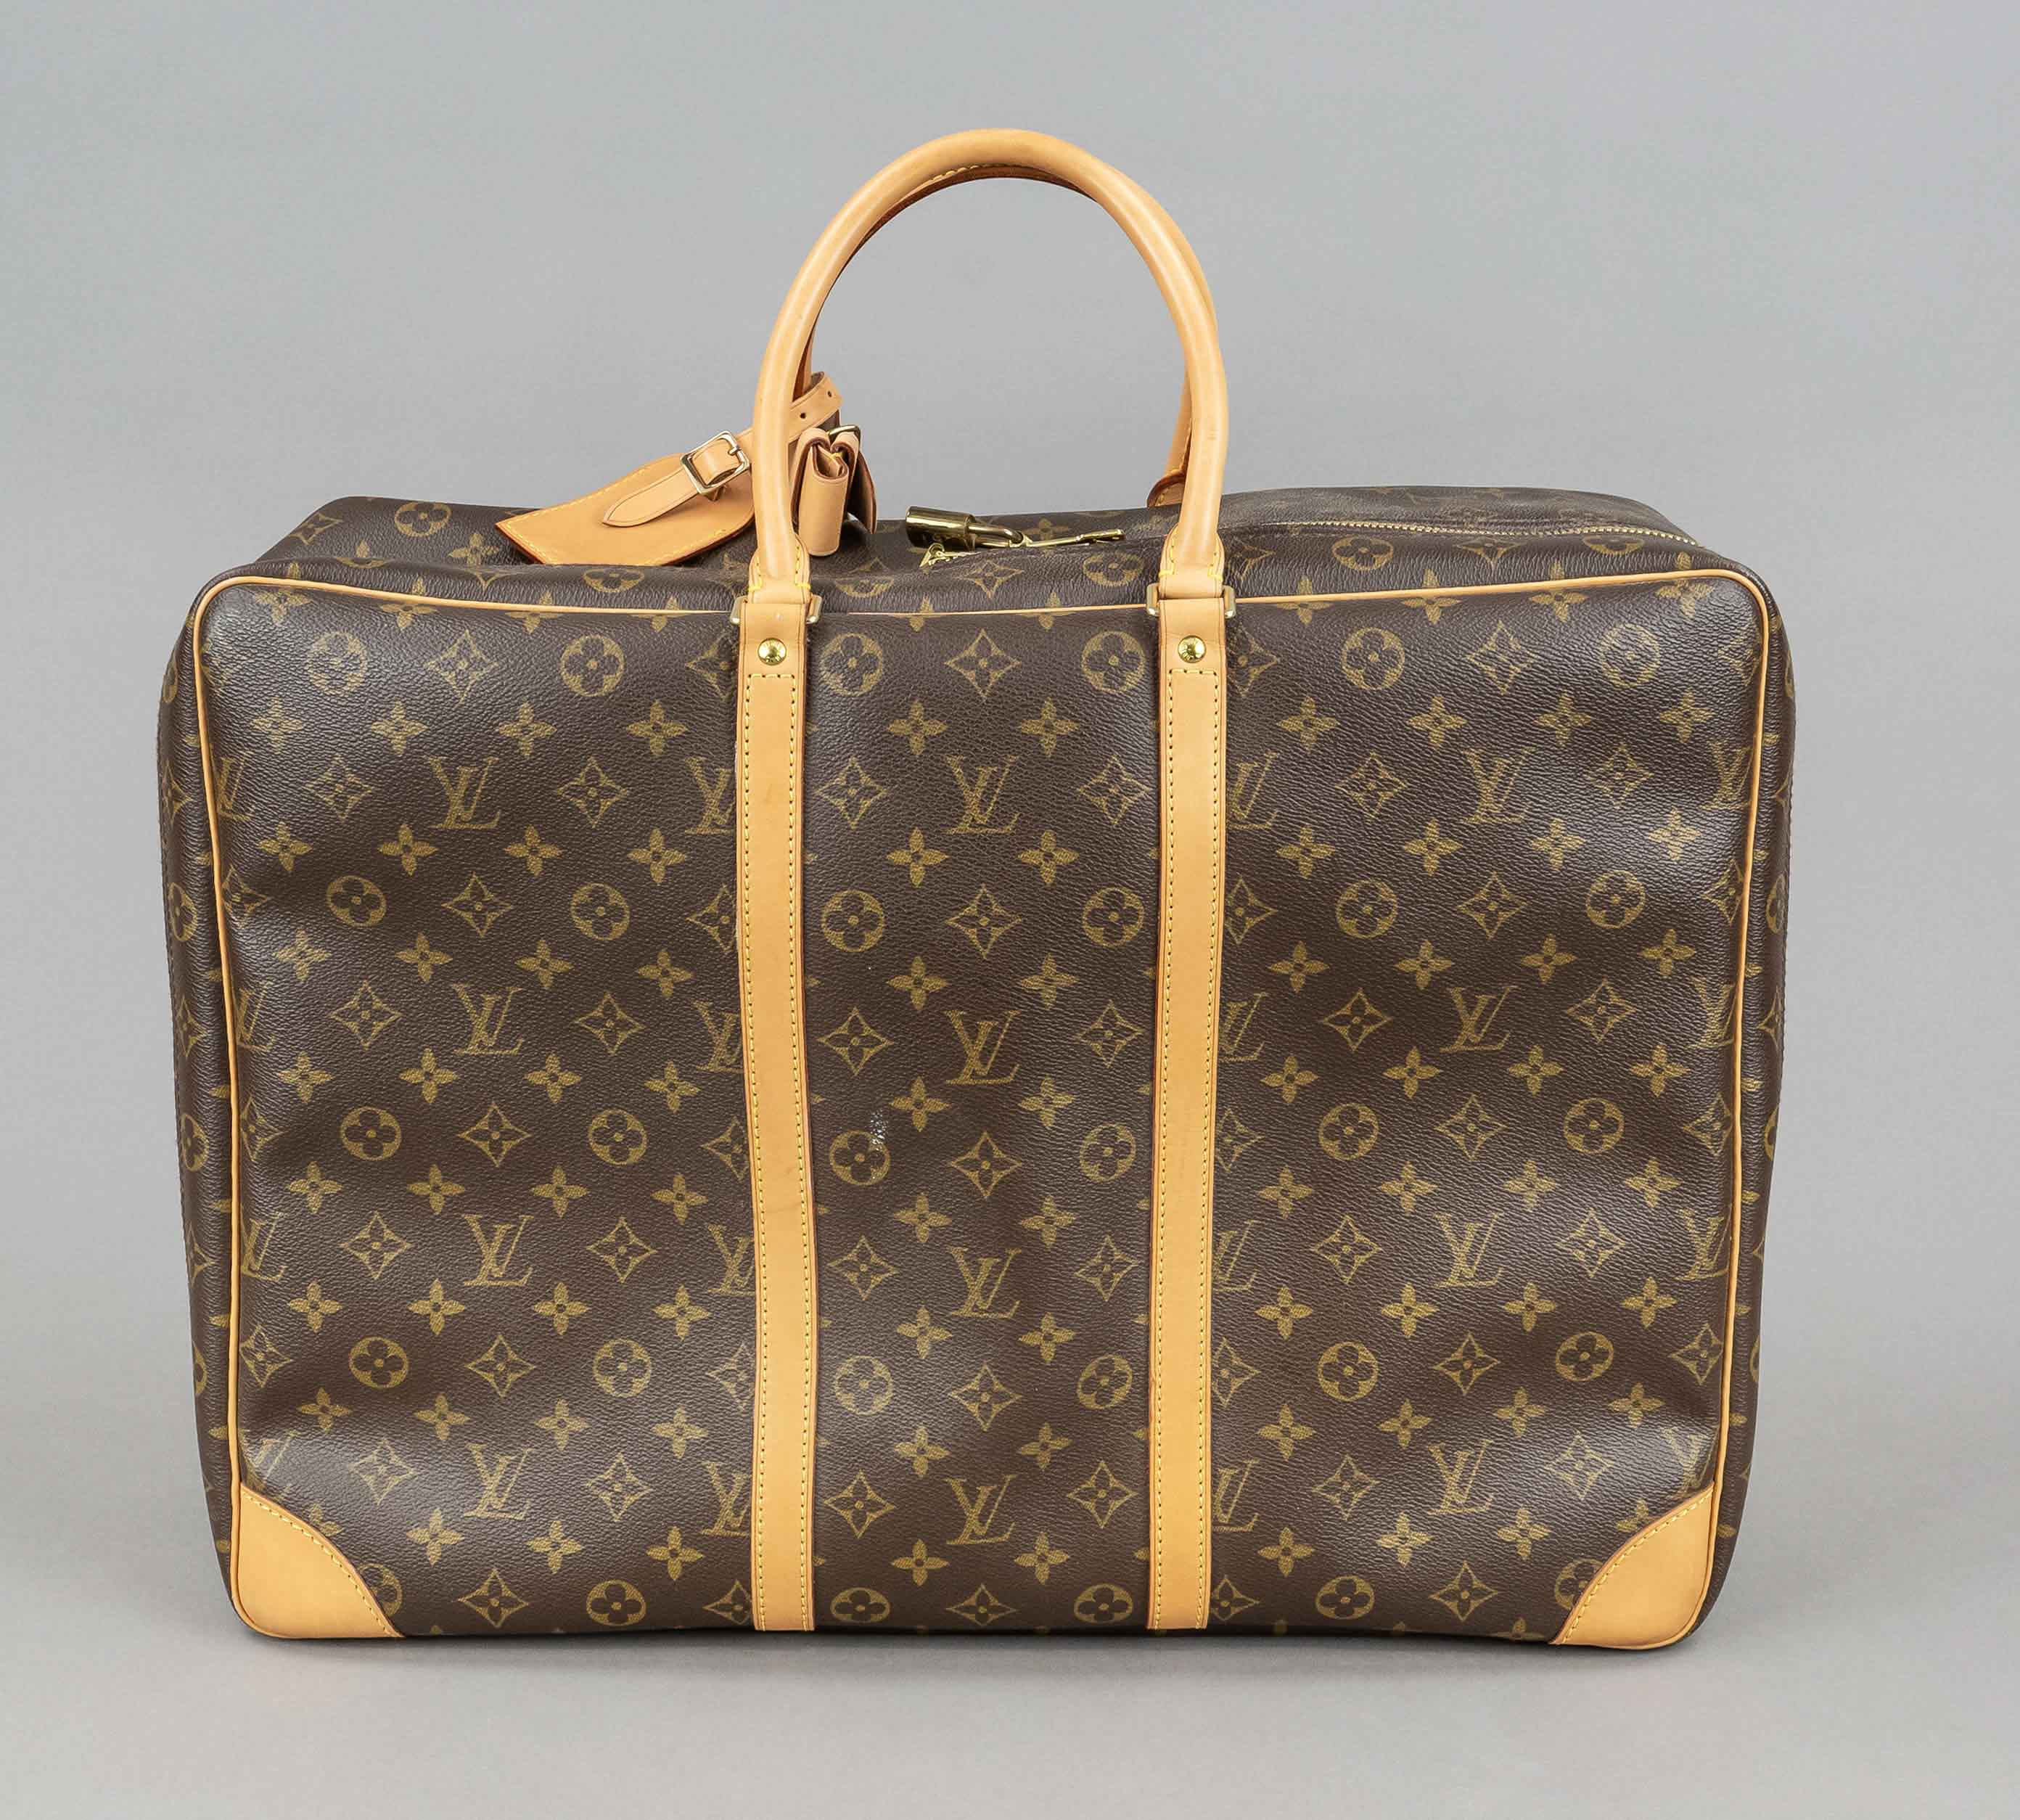 Louis Vuitton, Monogram Canvas Sirius 50 Weekender/Travelbag, rubberized cotton canvas in classic